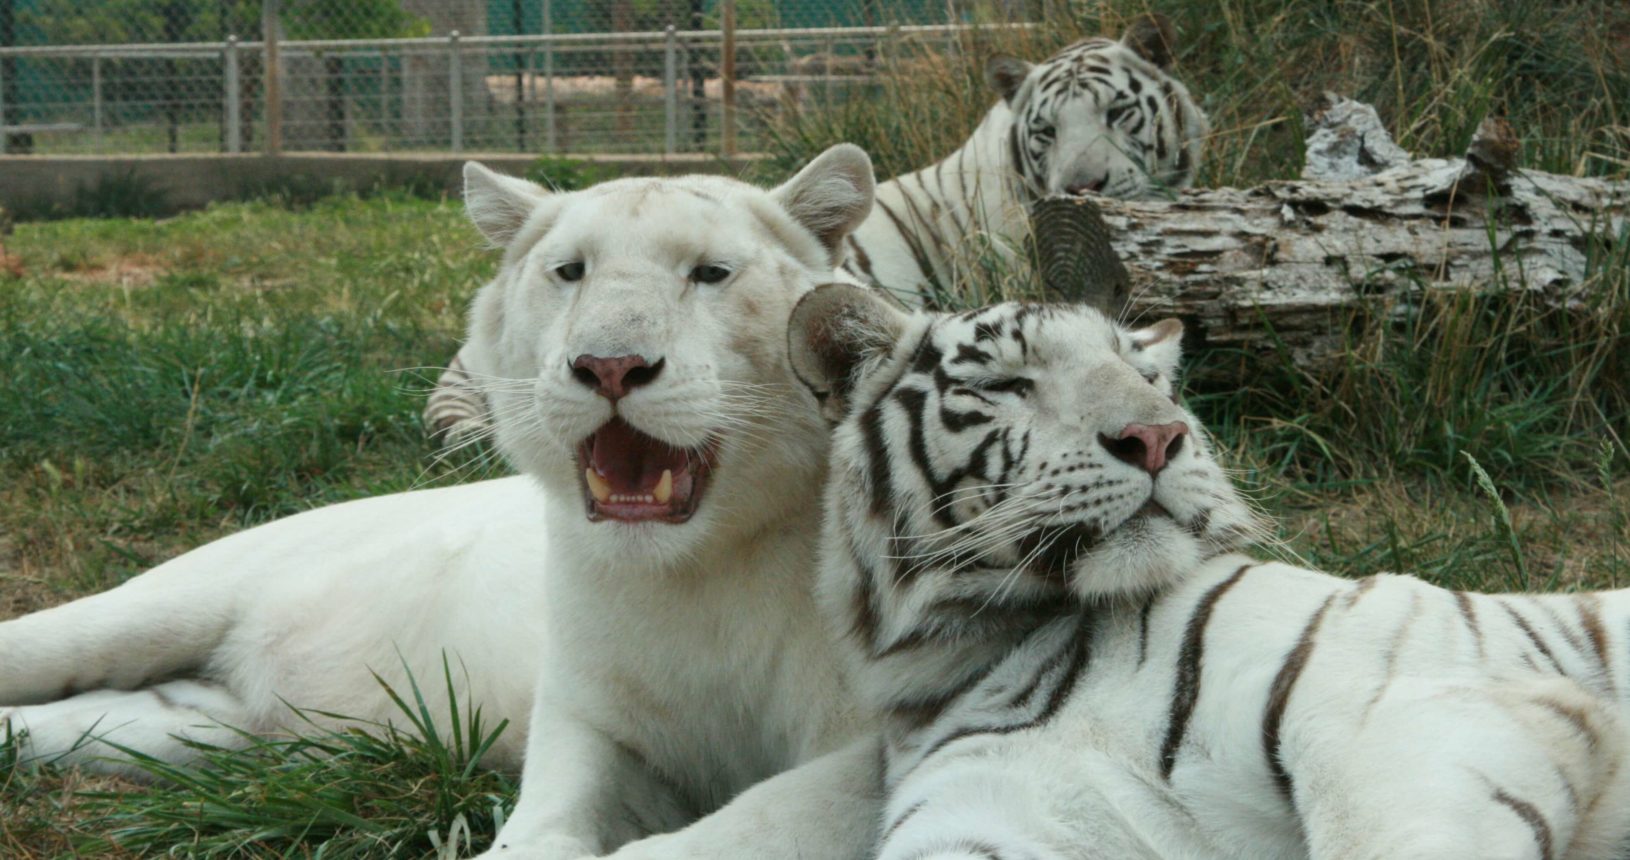 Three white tigers lay together.